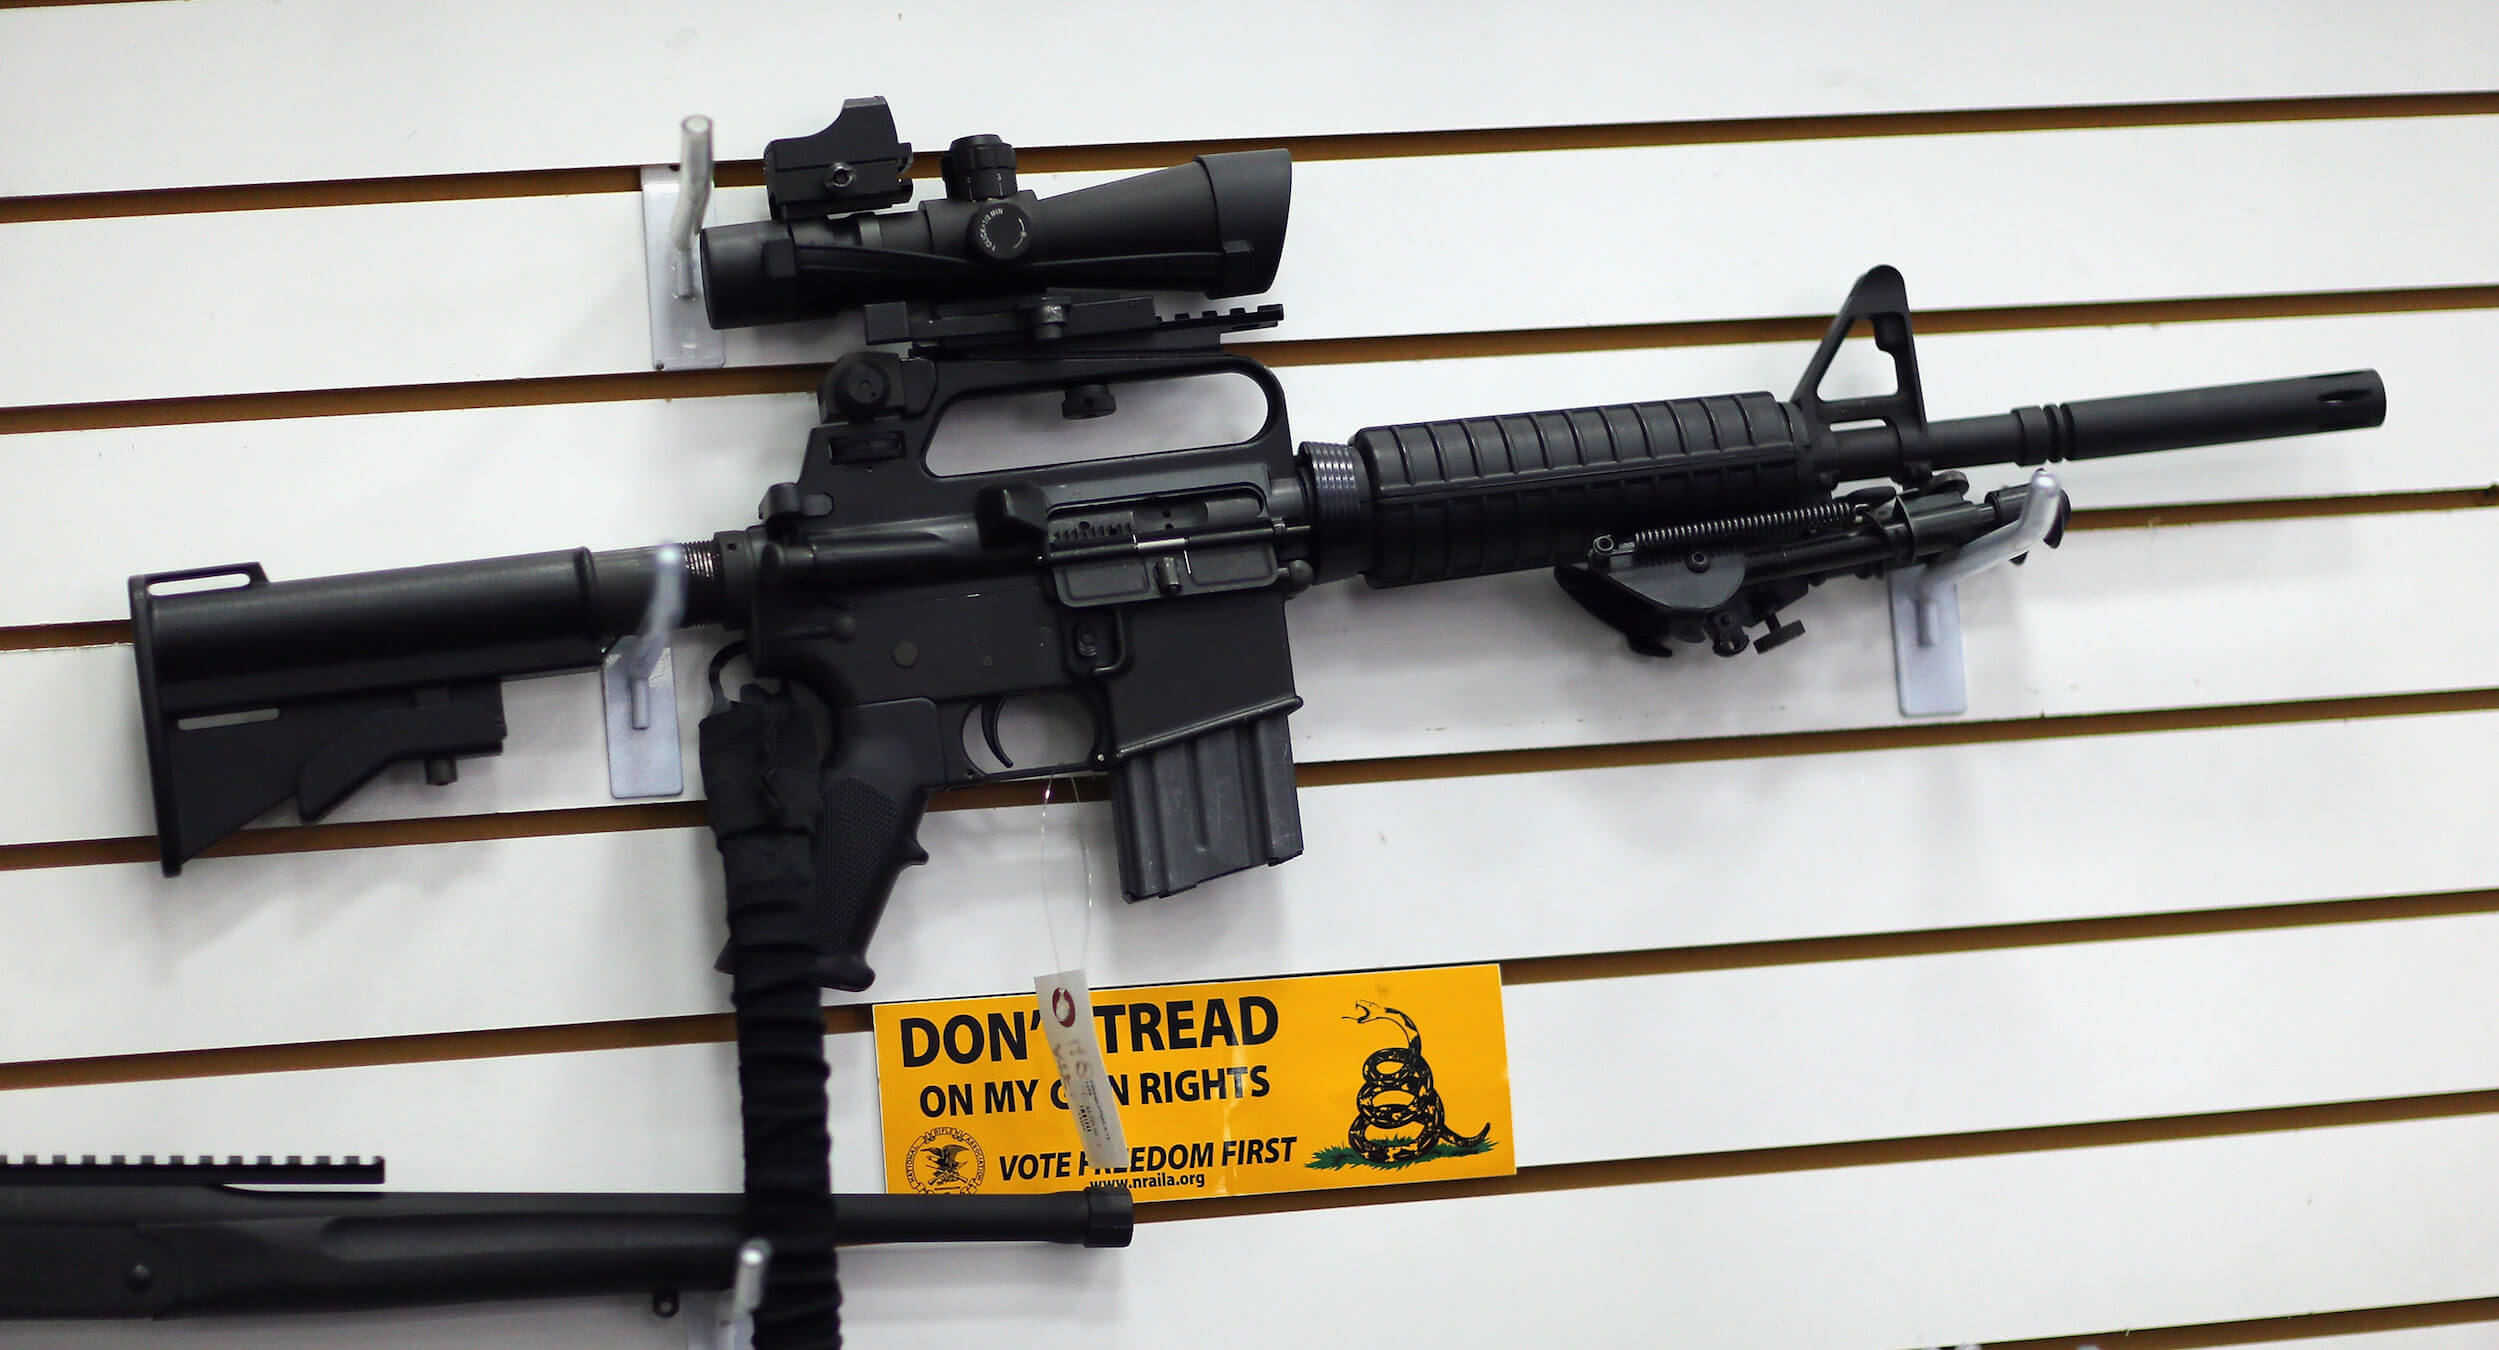 Why Do So Many Mass Shootings Involve an AR-15? › American Greatness